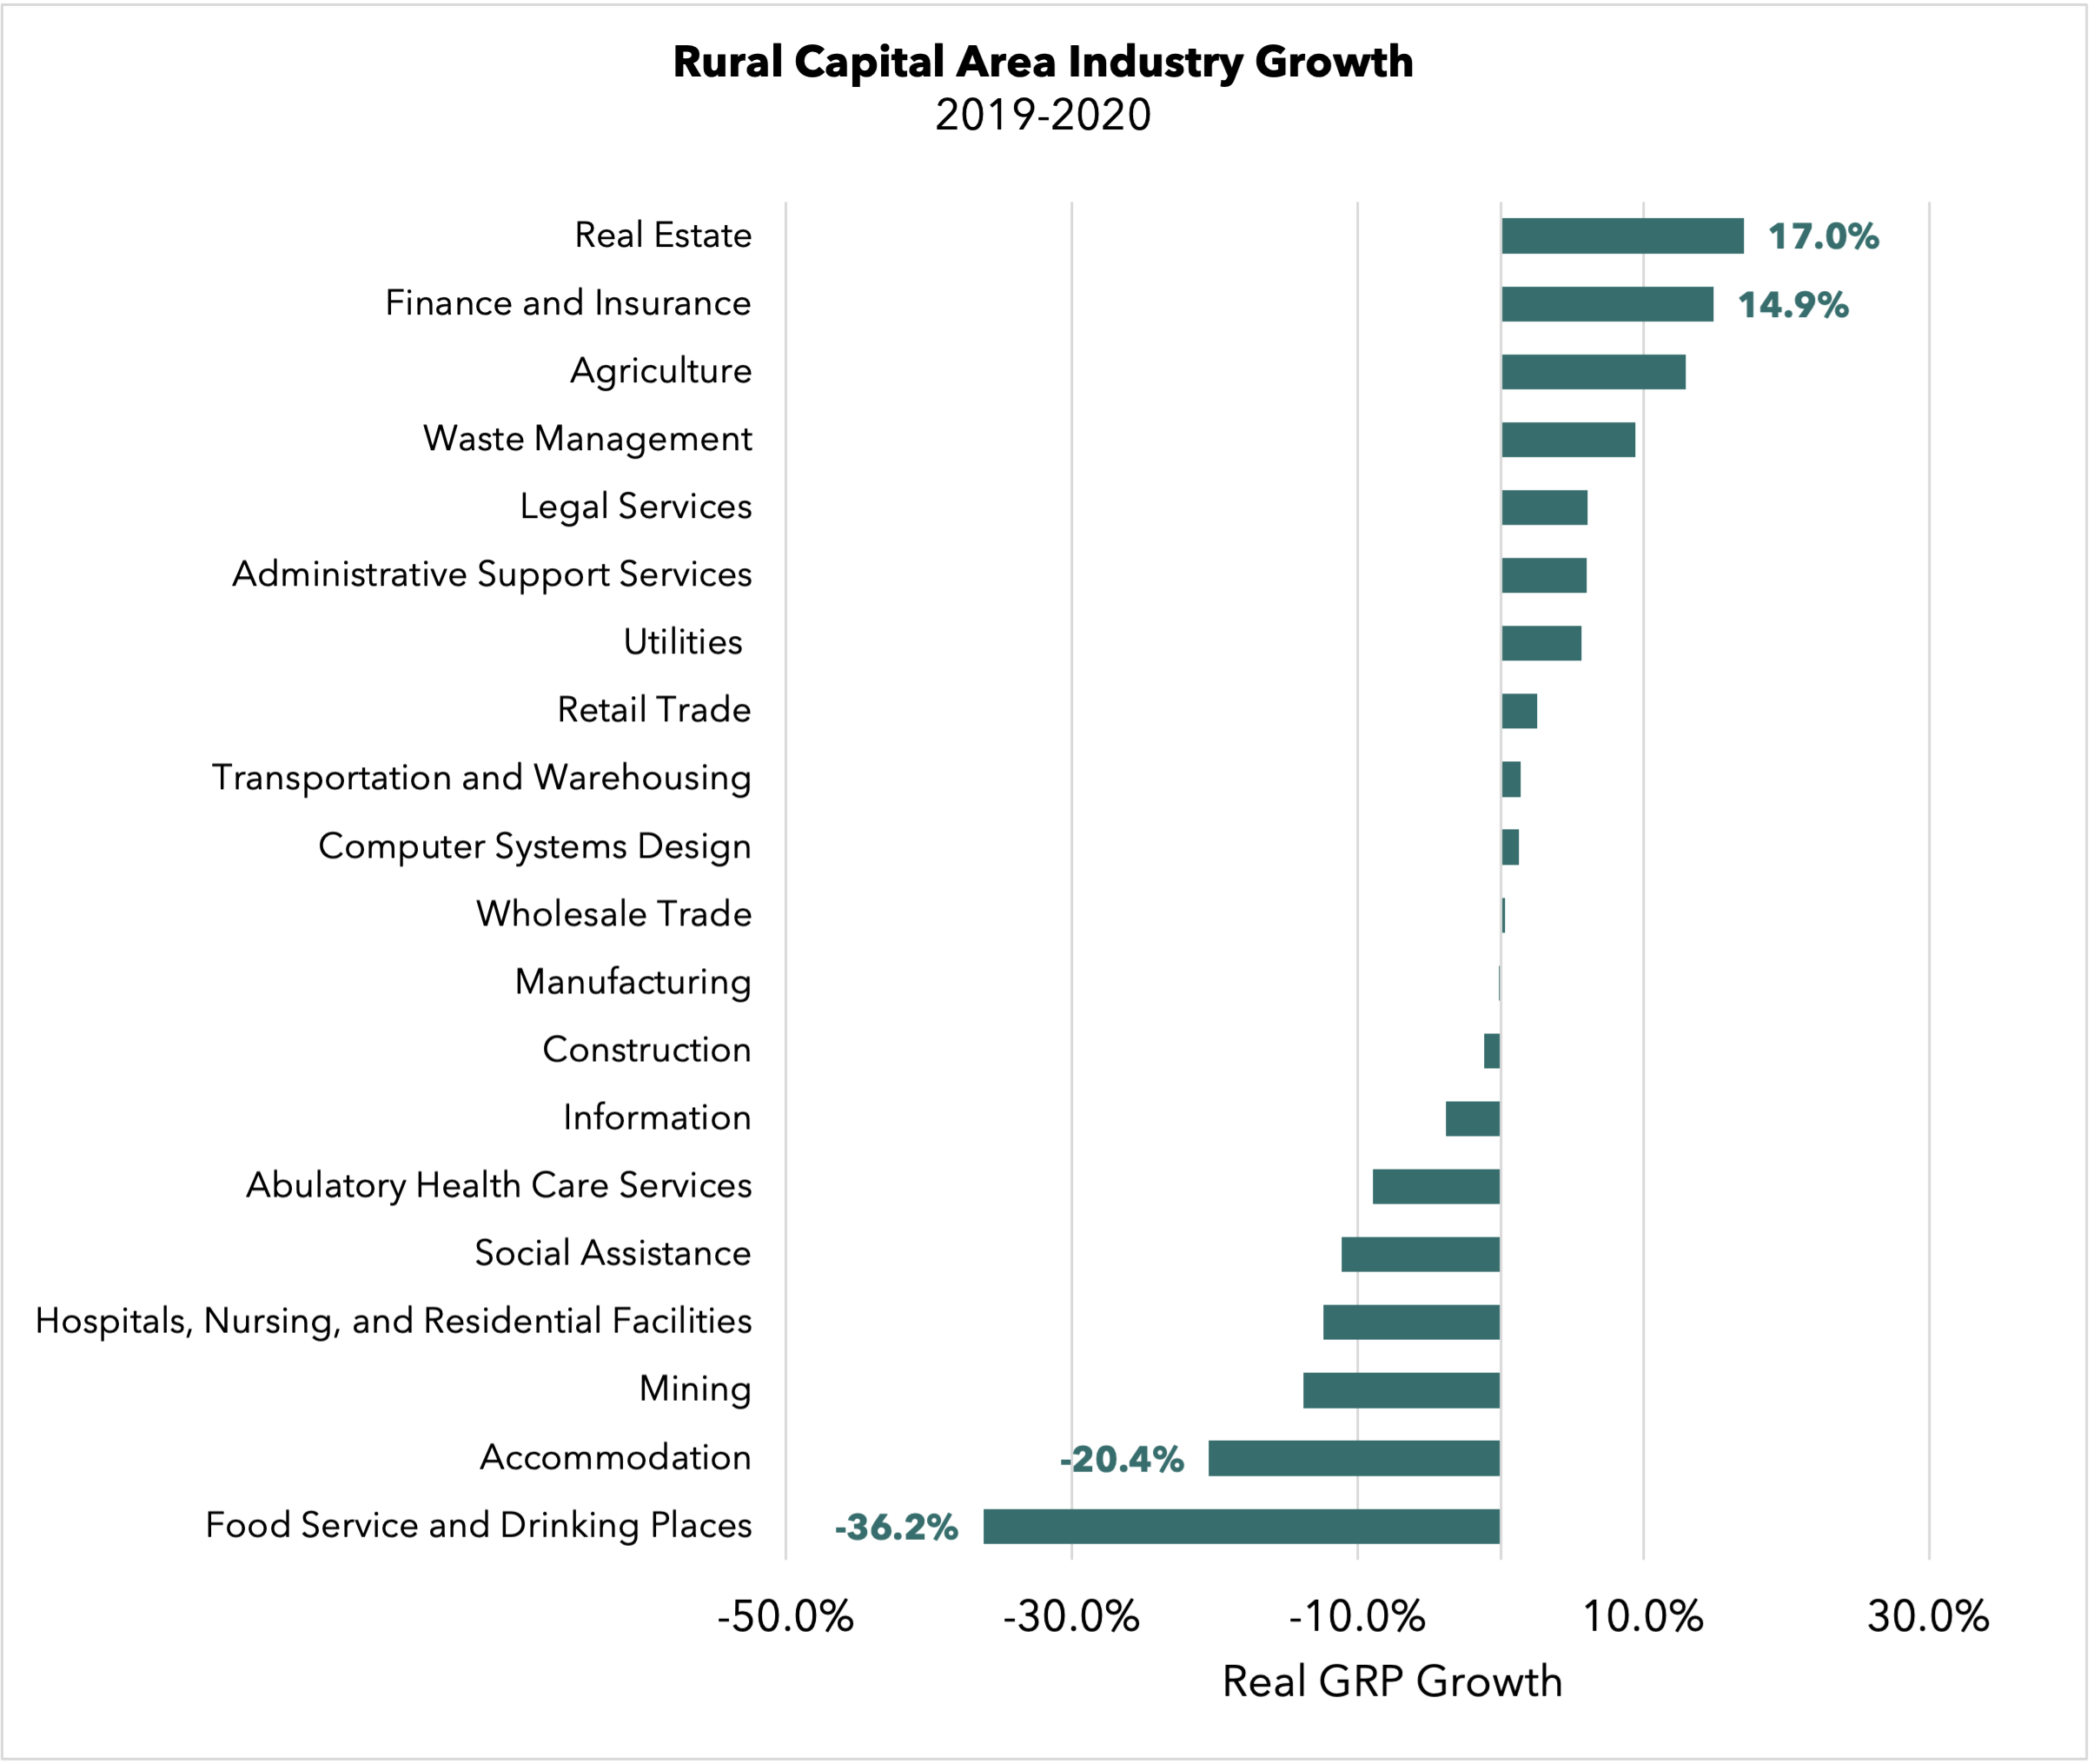 Chart of Rlural Capital Area Industry Growth in 2020h 